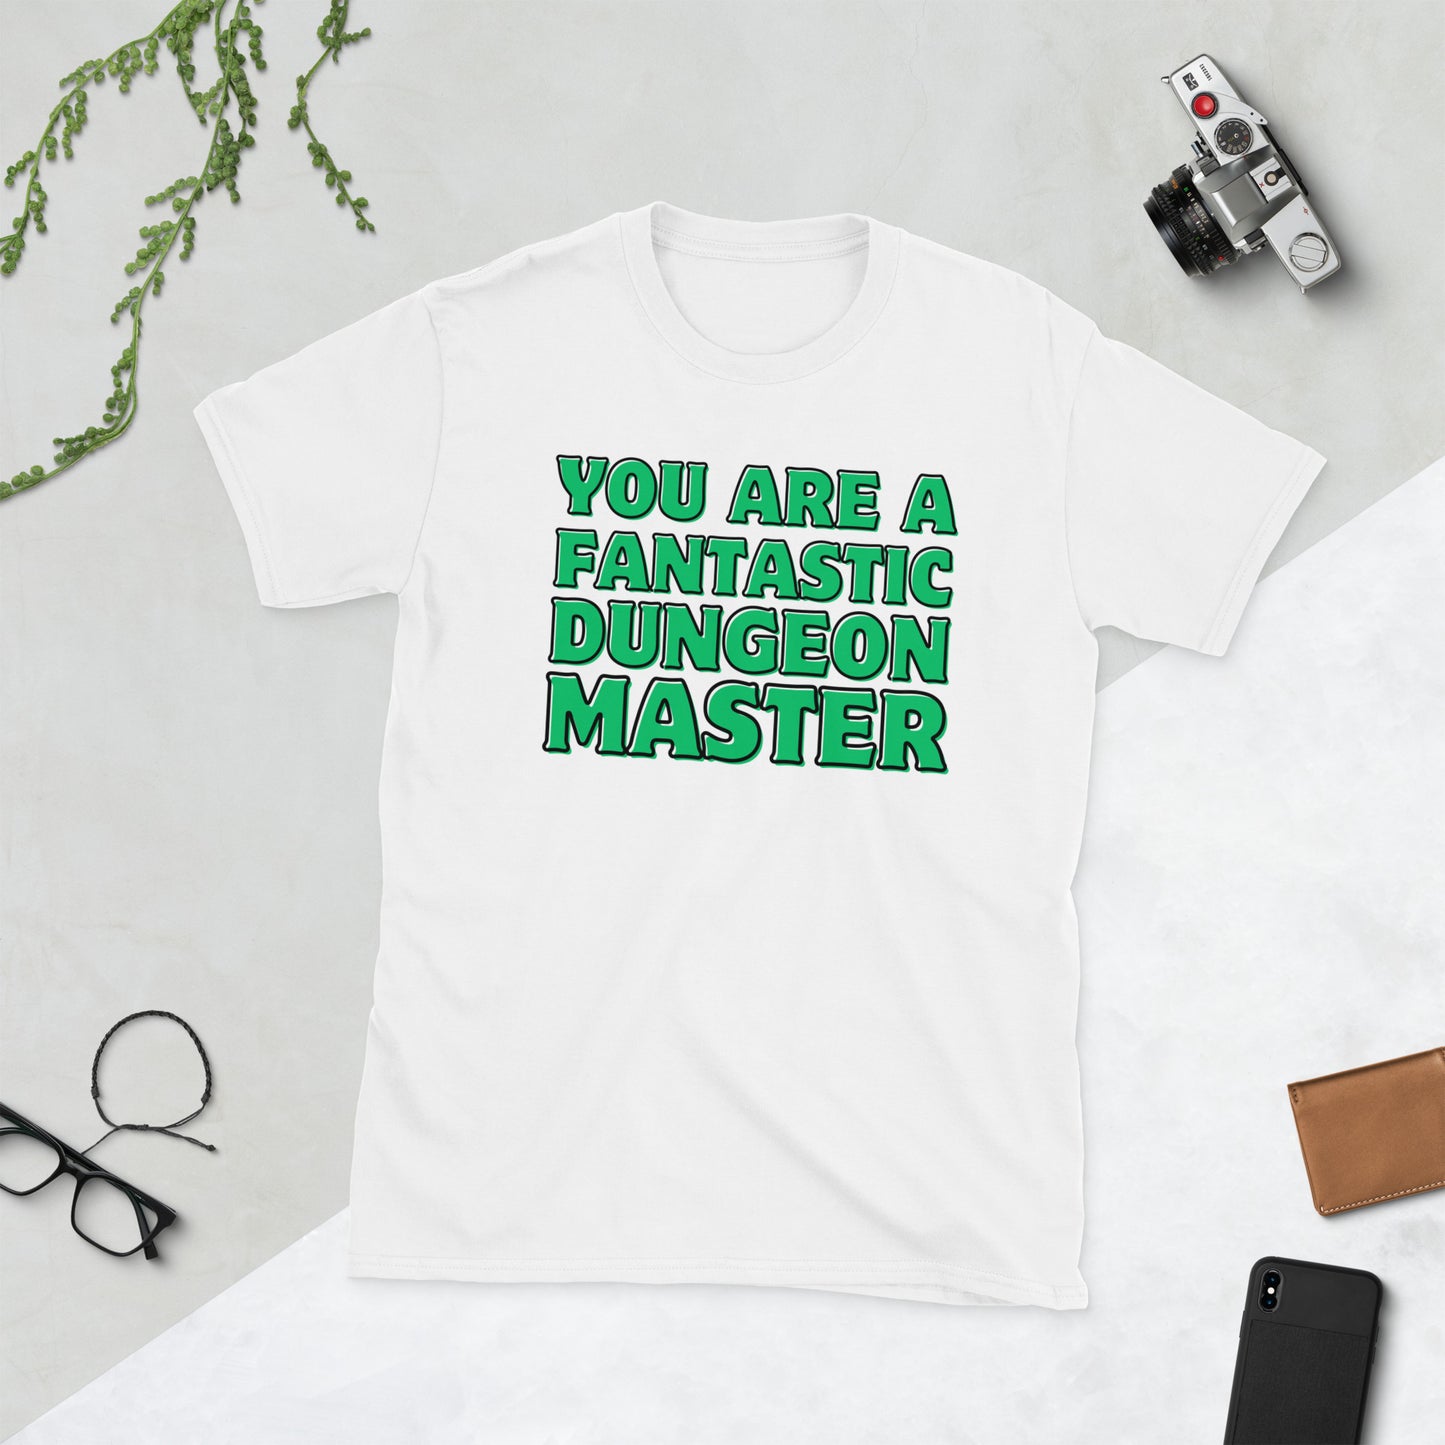 You are a fantastic dungeon master Short-Sleeve Unisex T-Shirt  Level 1 Gamers White S 